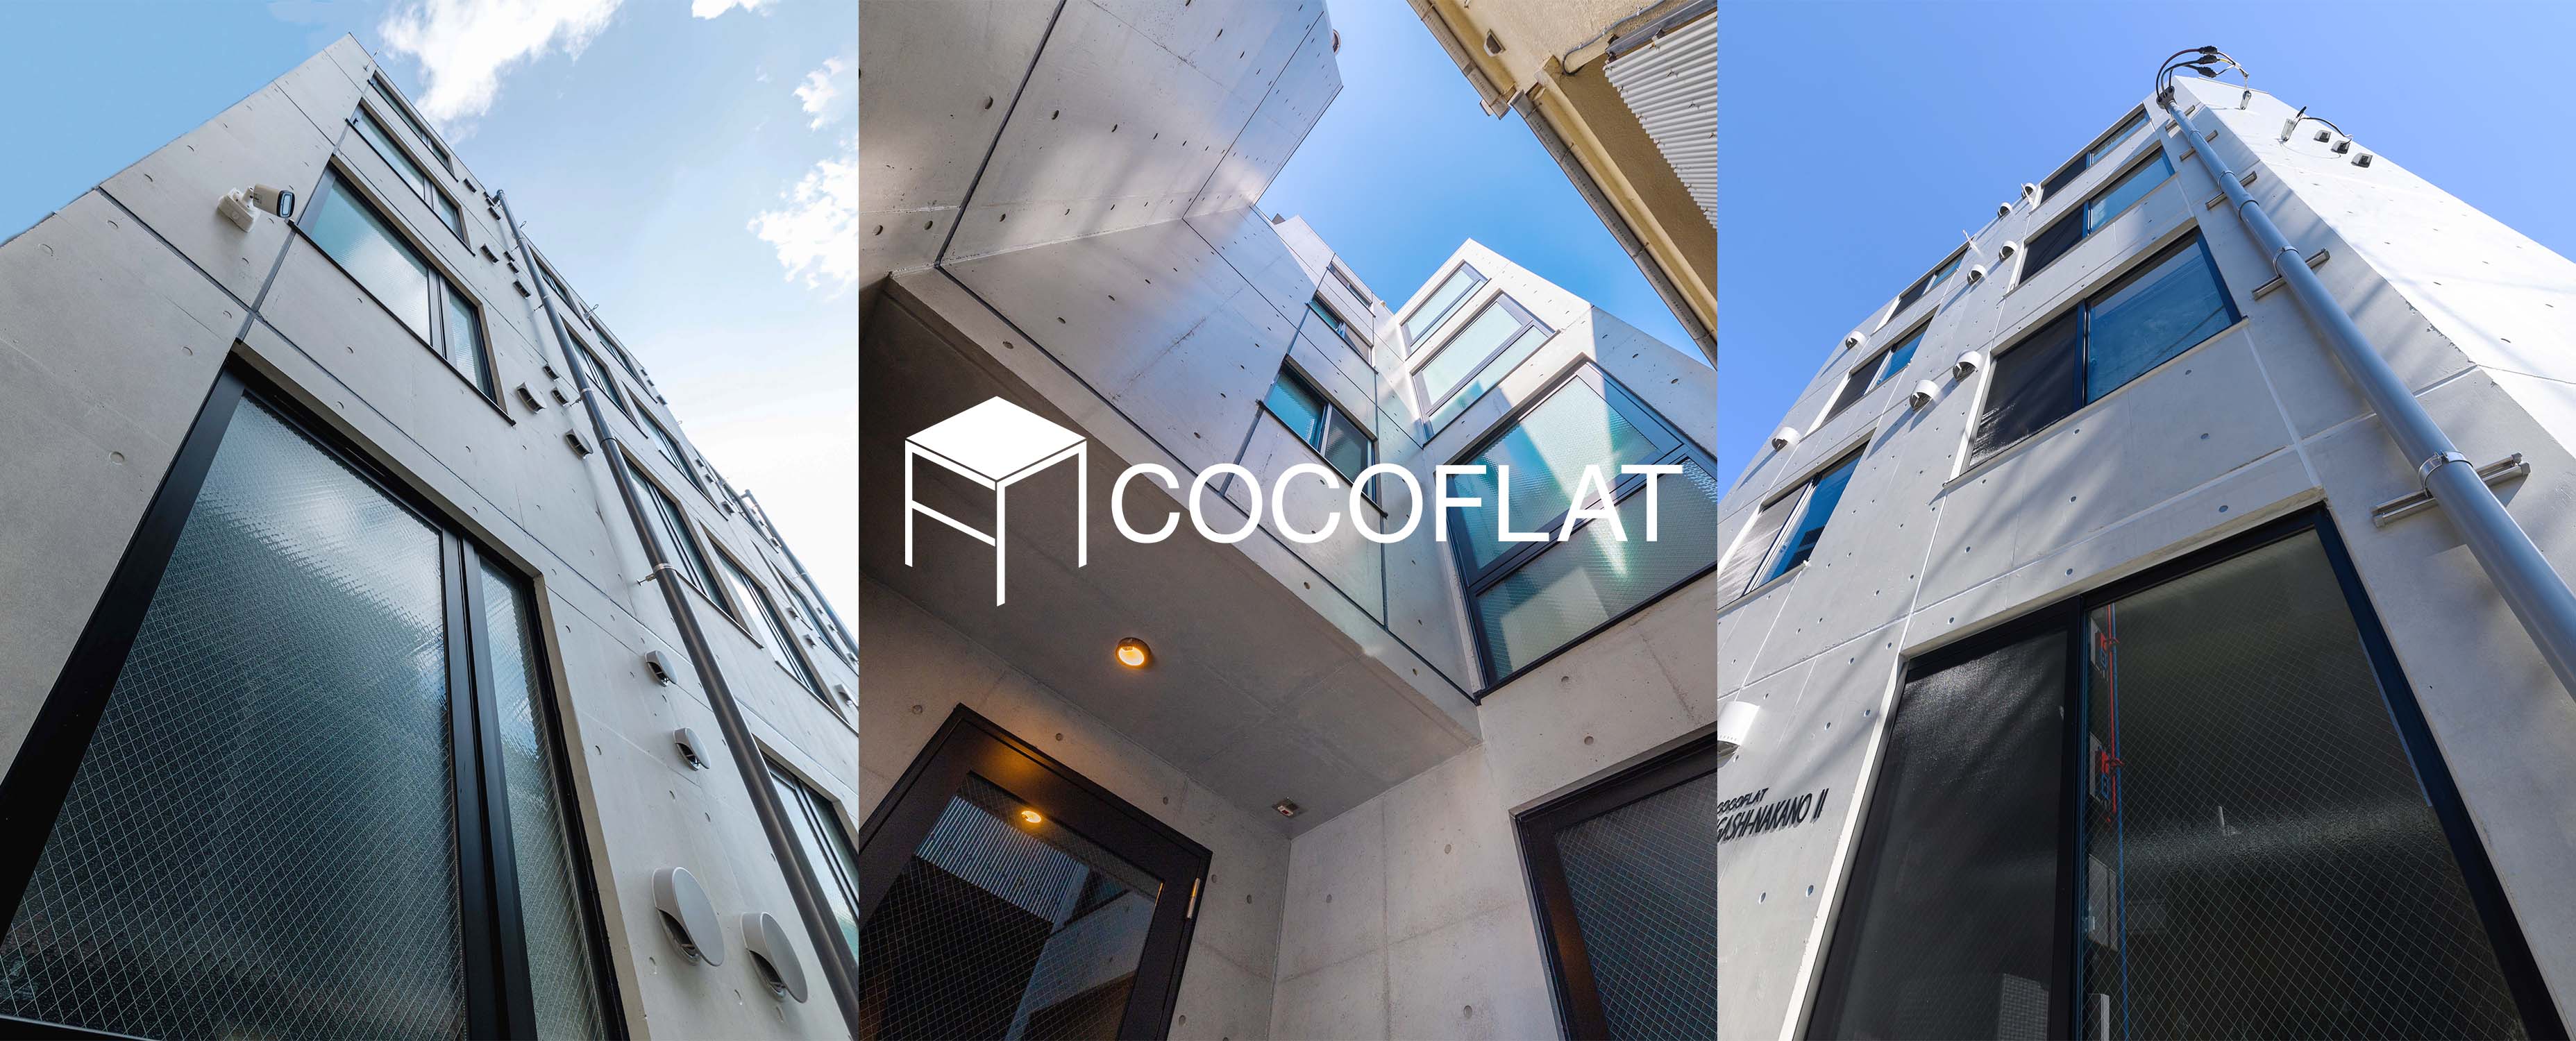 COCOFLAT brand banner